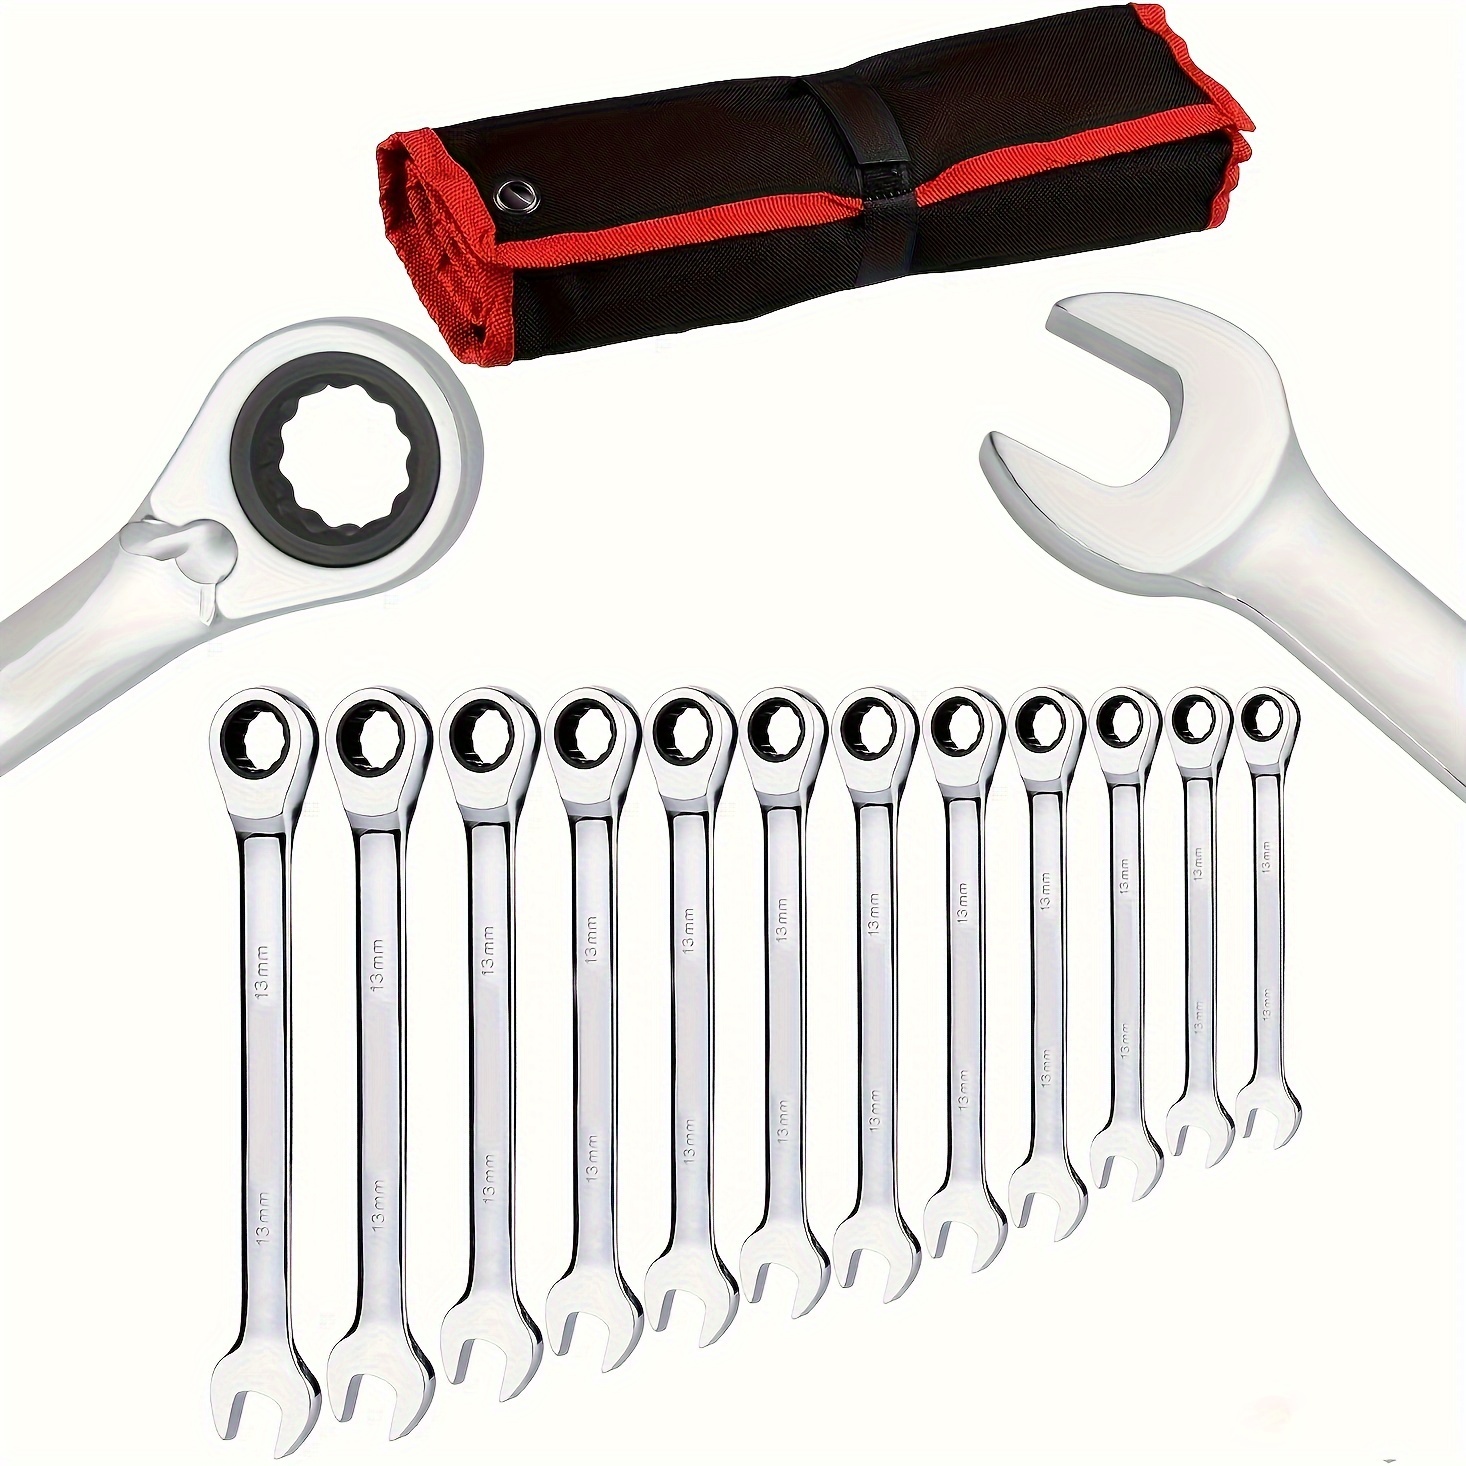 

Ratchet Spanner Set Combination Wrench 12 Piece Metric Sizes From 8mm To 19mm With Roll Bag, Perfect For Home, Bike, Car Repairs